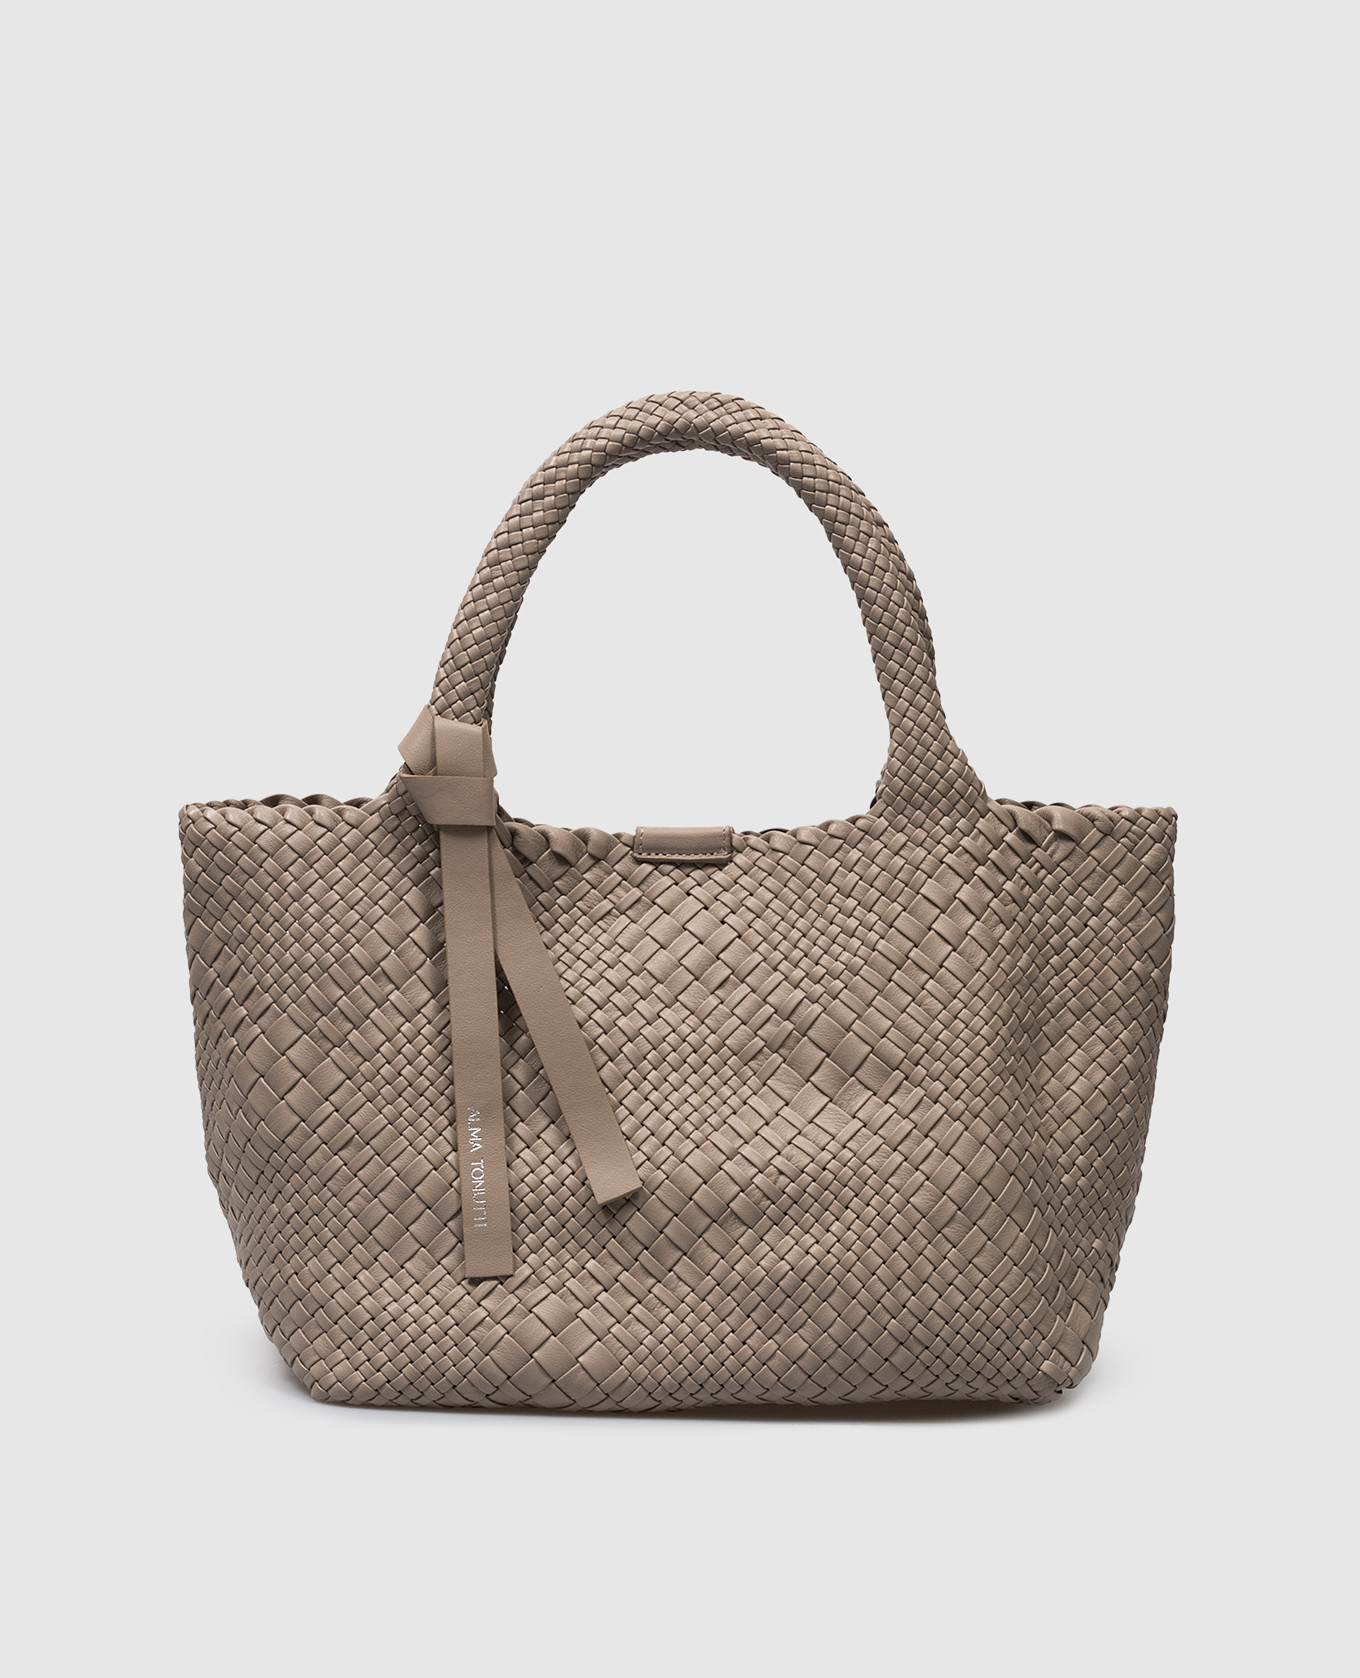 Beige leather tote bag with weaving